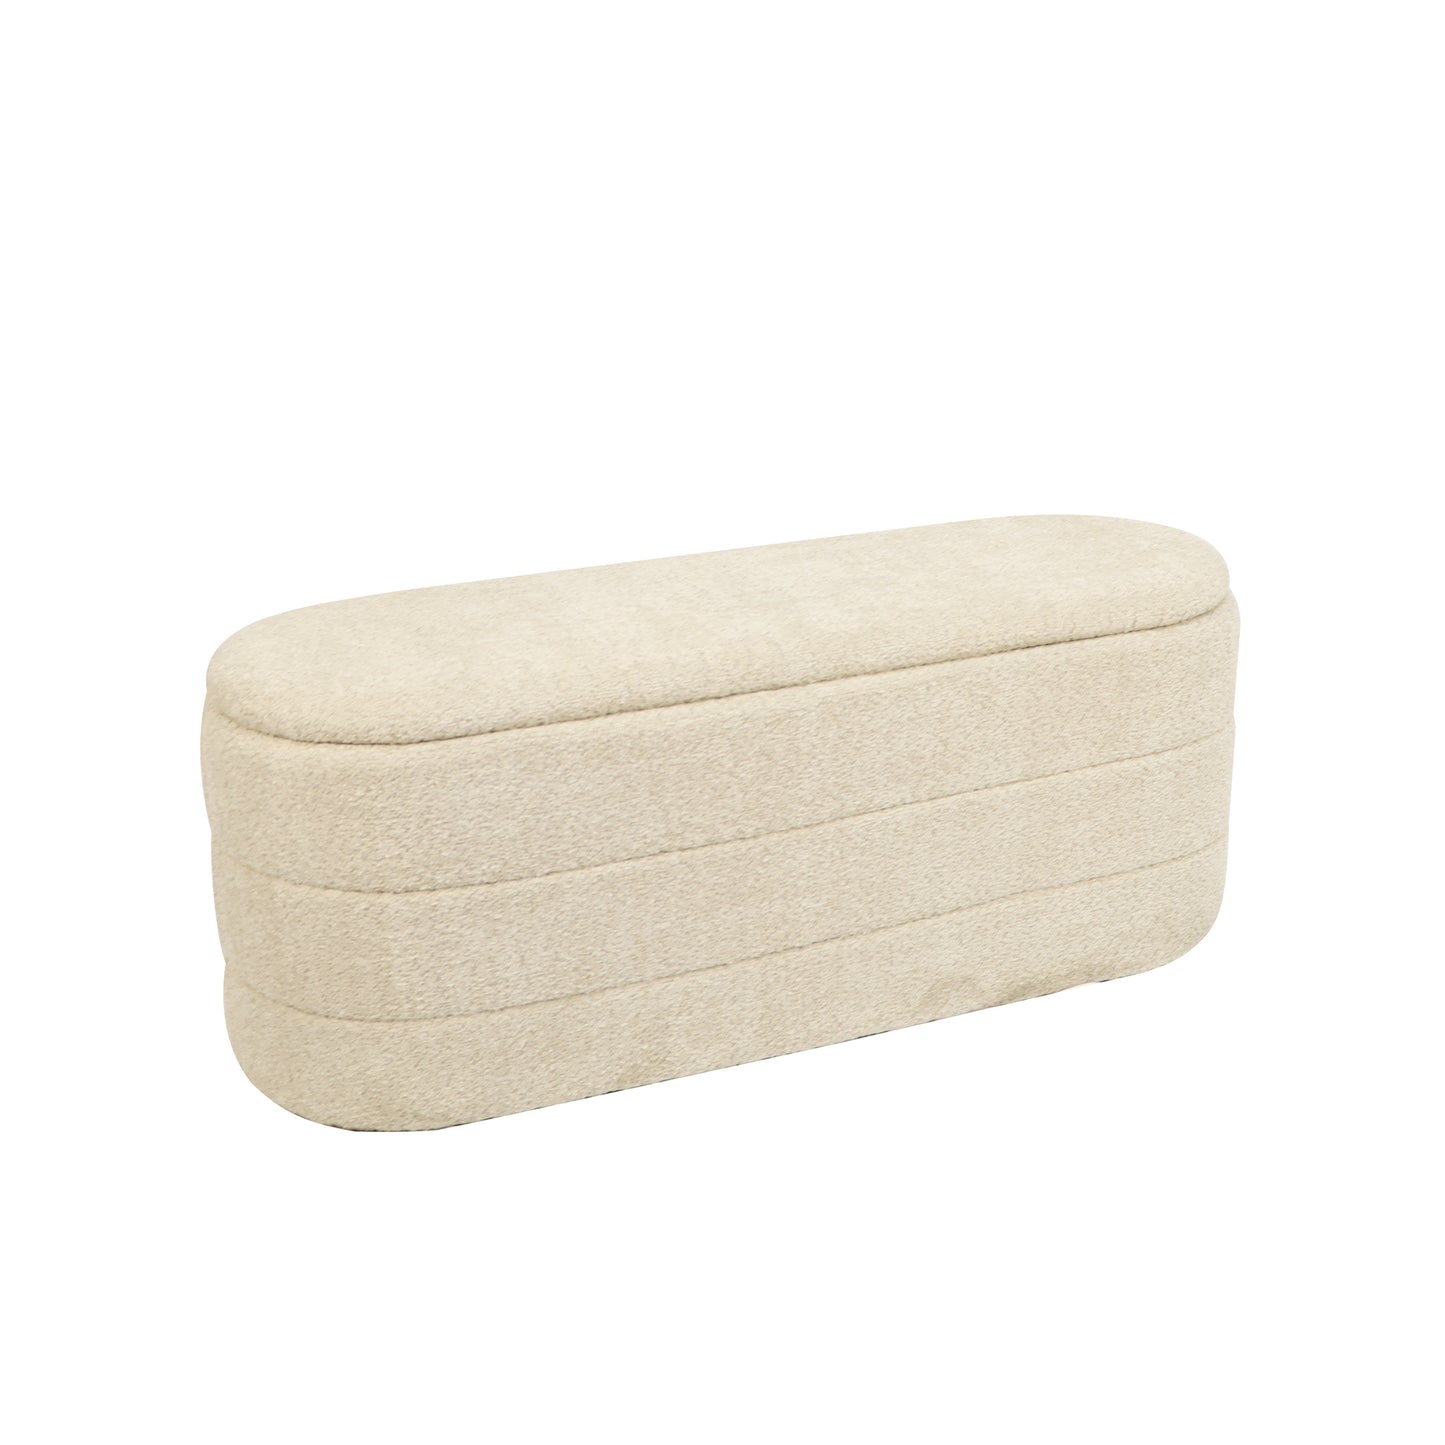 Faux Shearling Fabric Storage Bench With Storage Space BBS-467